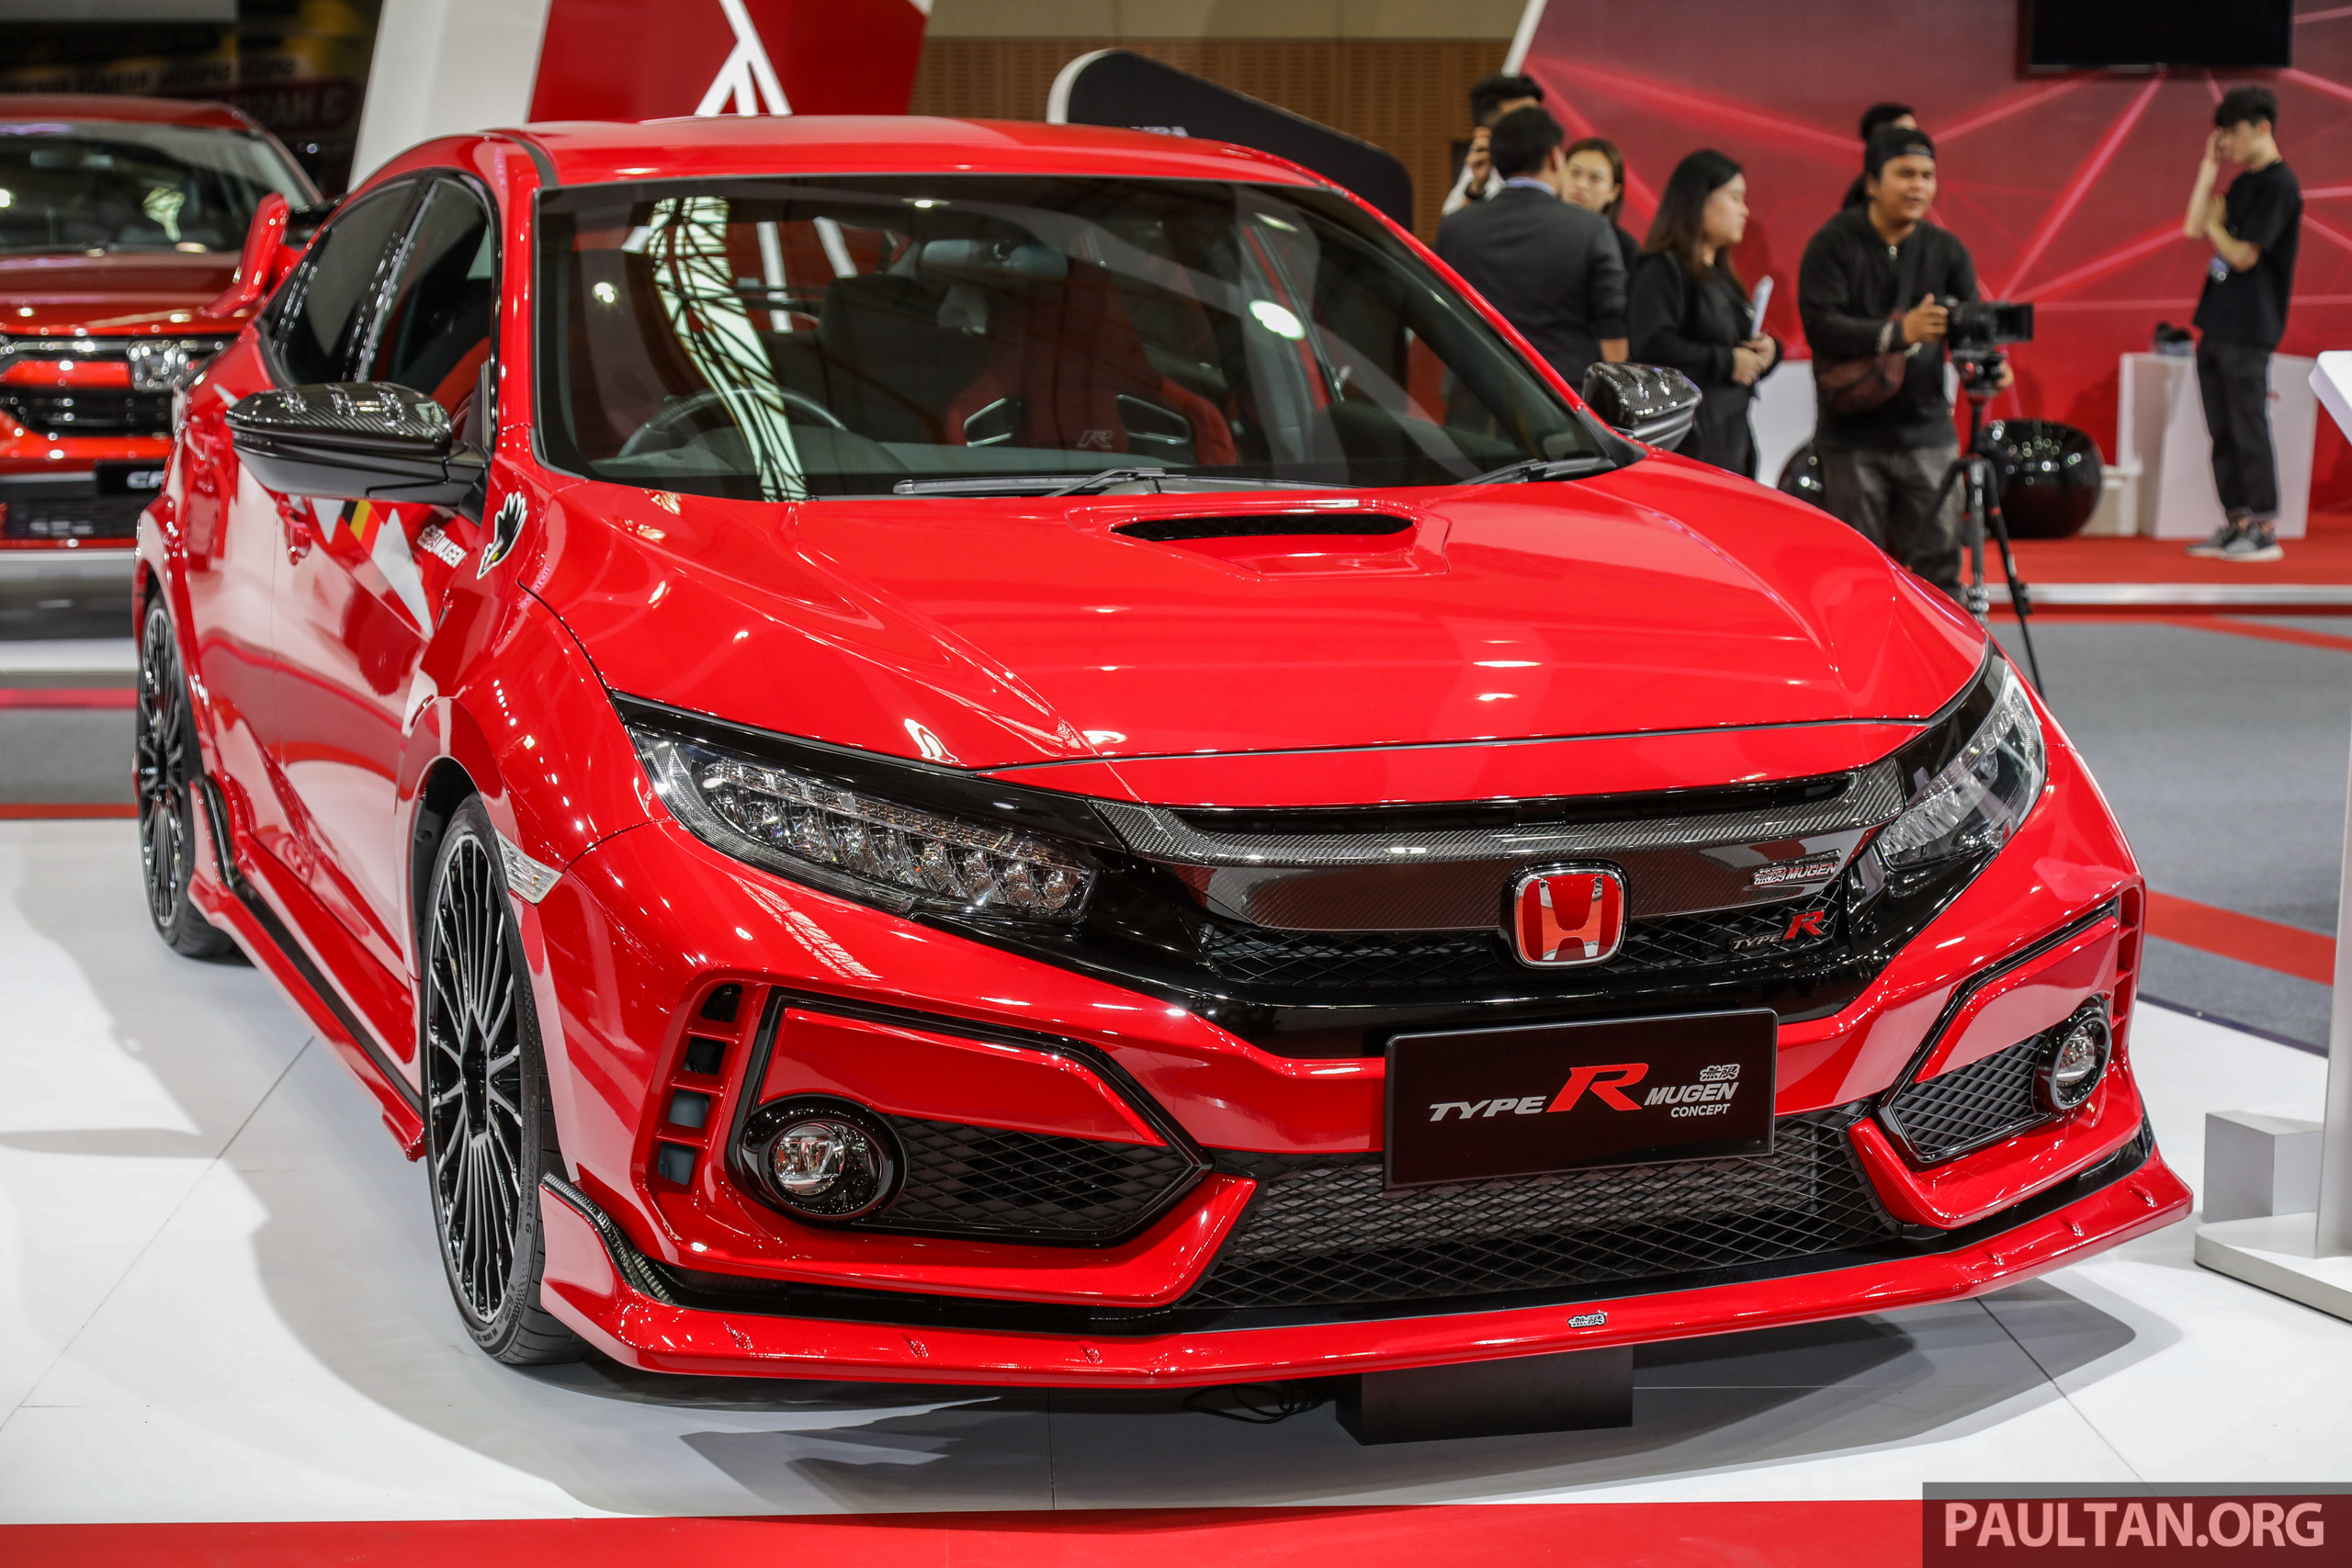 Fk8 Honda Civic Type R Mugen Concept On Show In Malaysia - First Appearance  In Southeast Asia - Paultan.Org